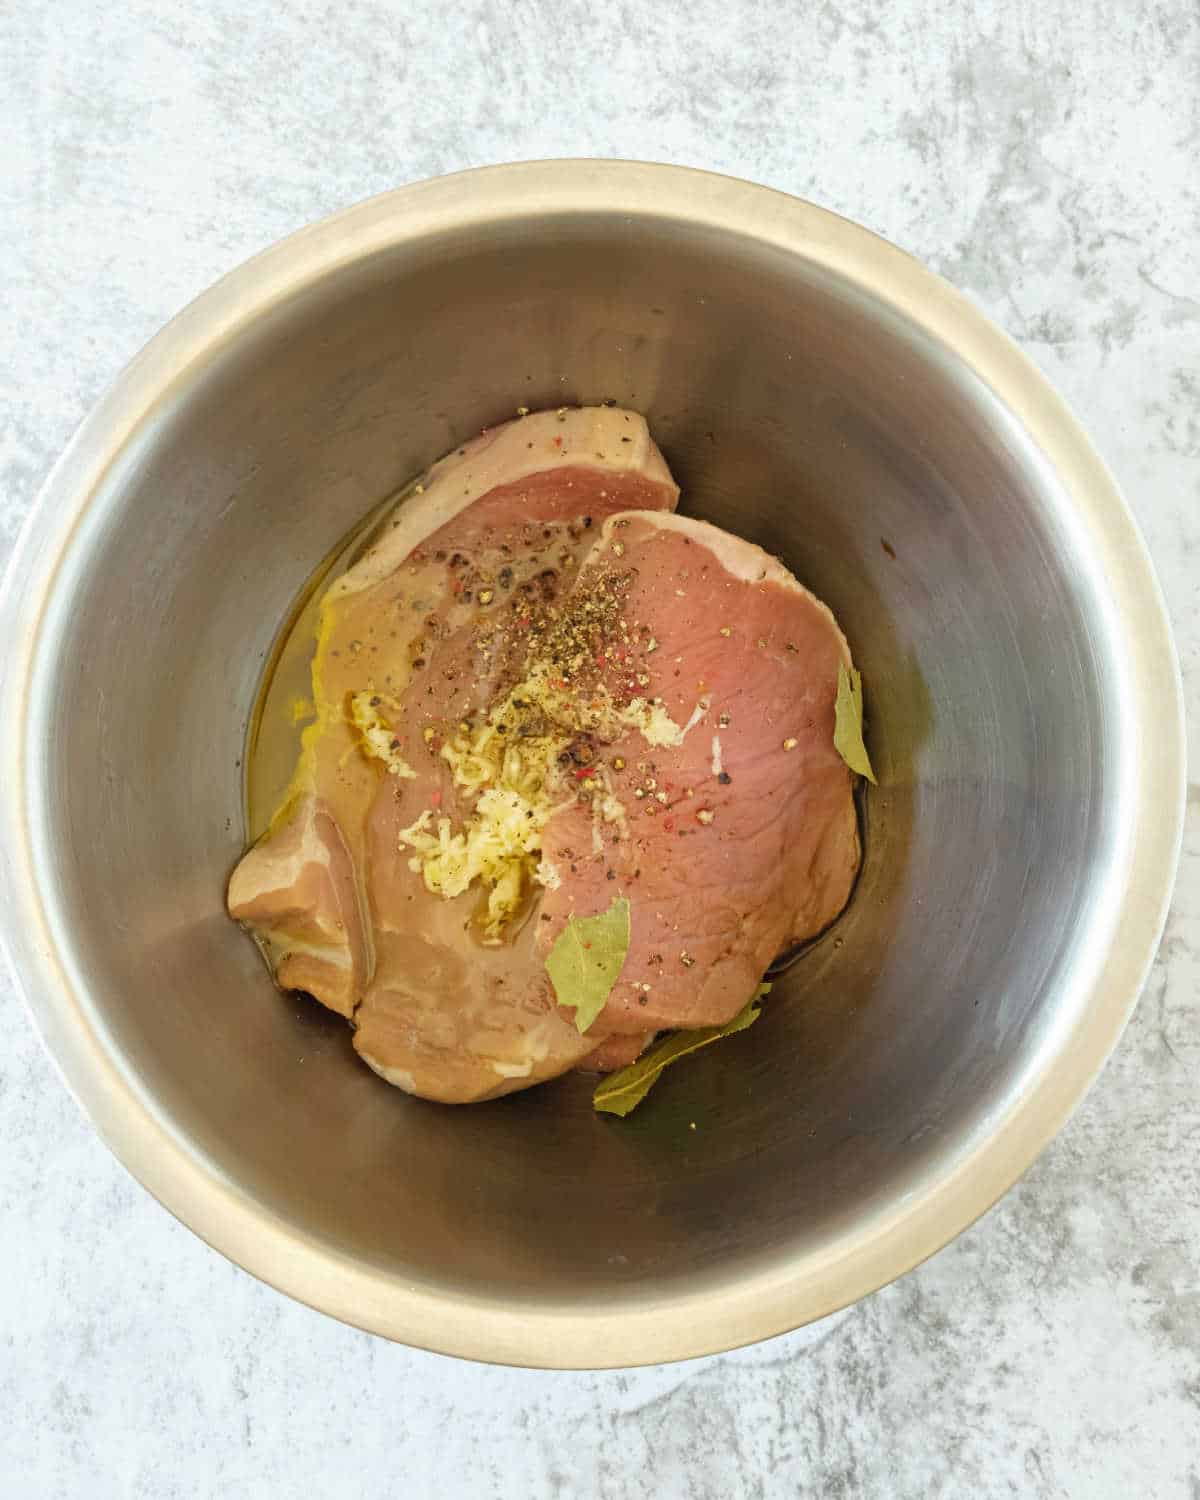 Metal bowl with meat marinating in olive oil and spices. Textured grey surface.